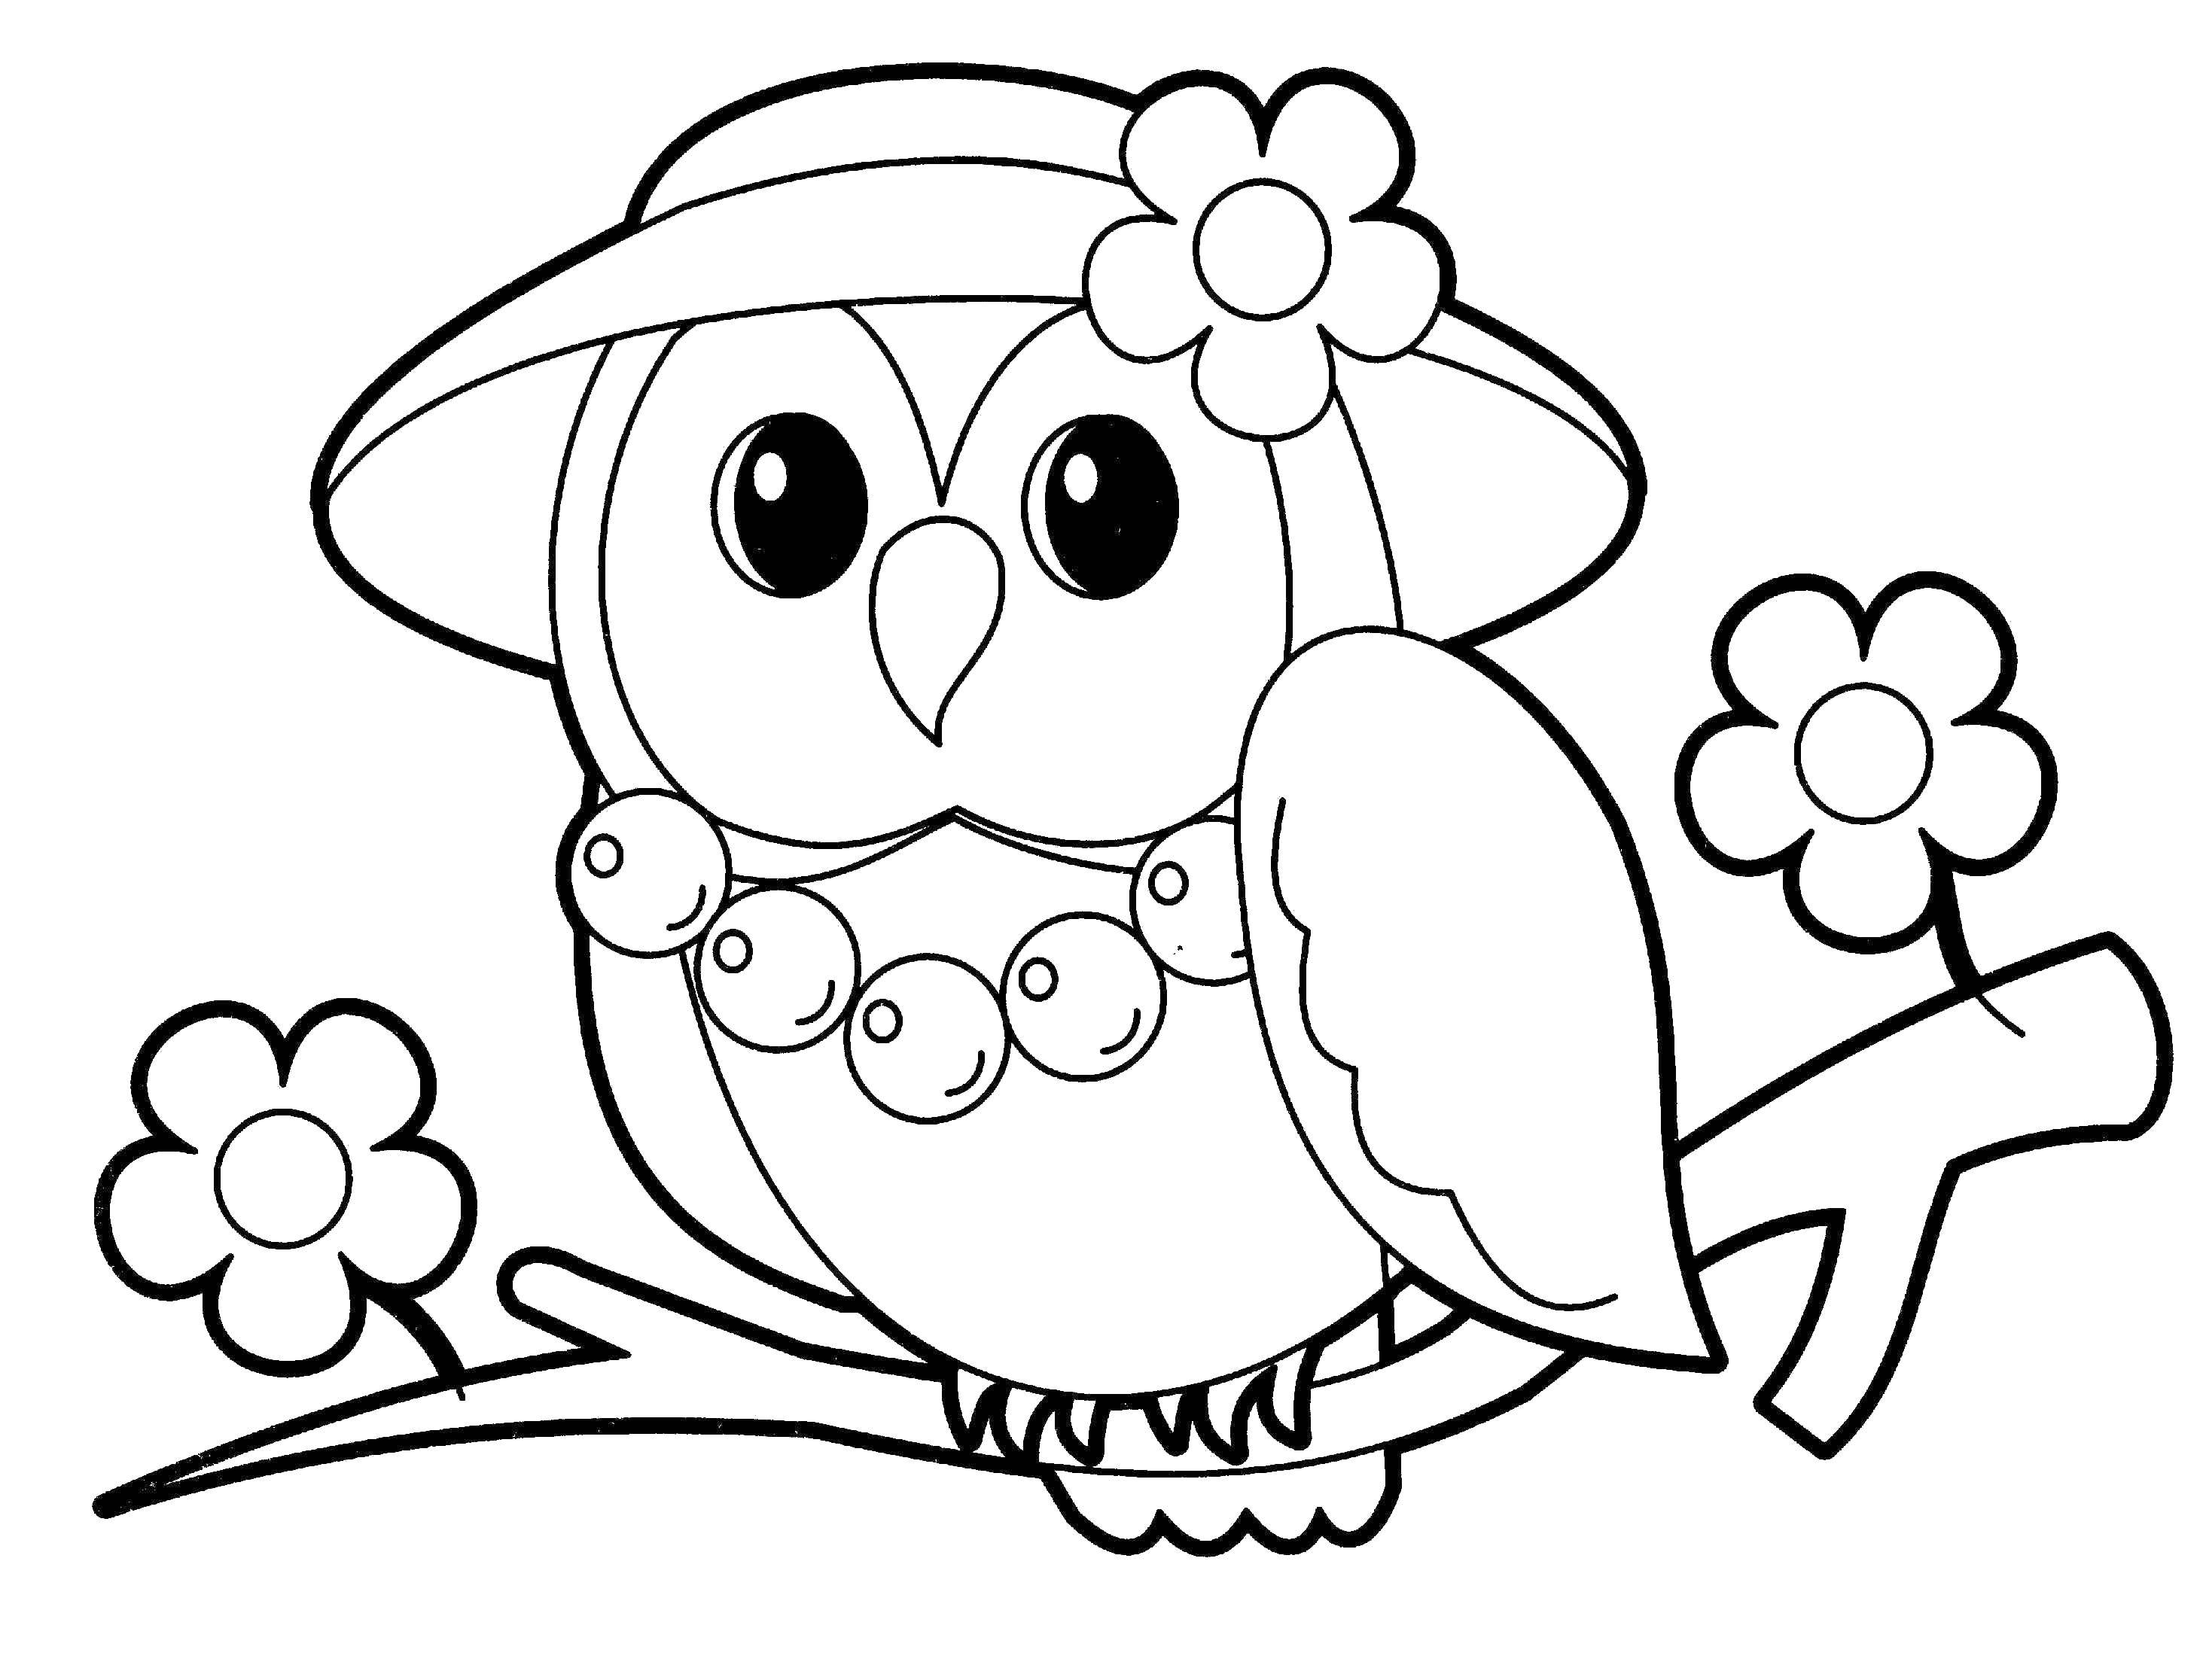 Coloring Owl - fashionista. Category Coloring pages for kids. Tags:  Owl.